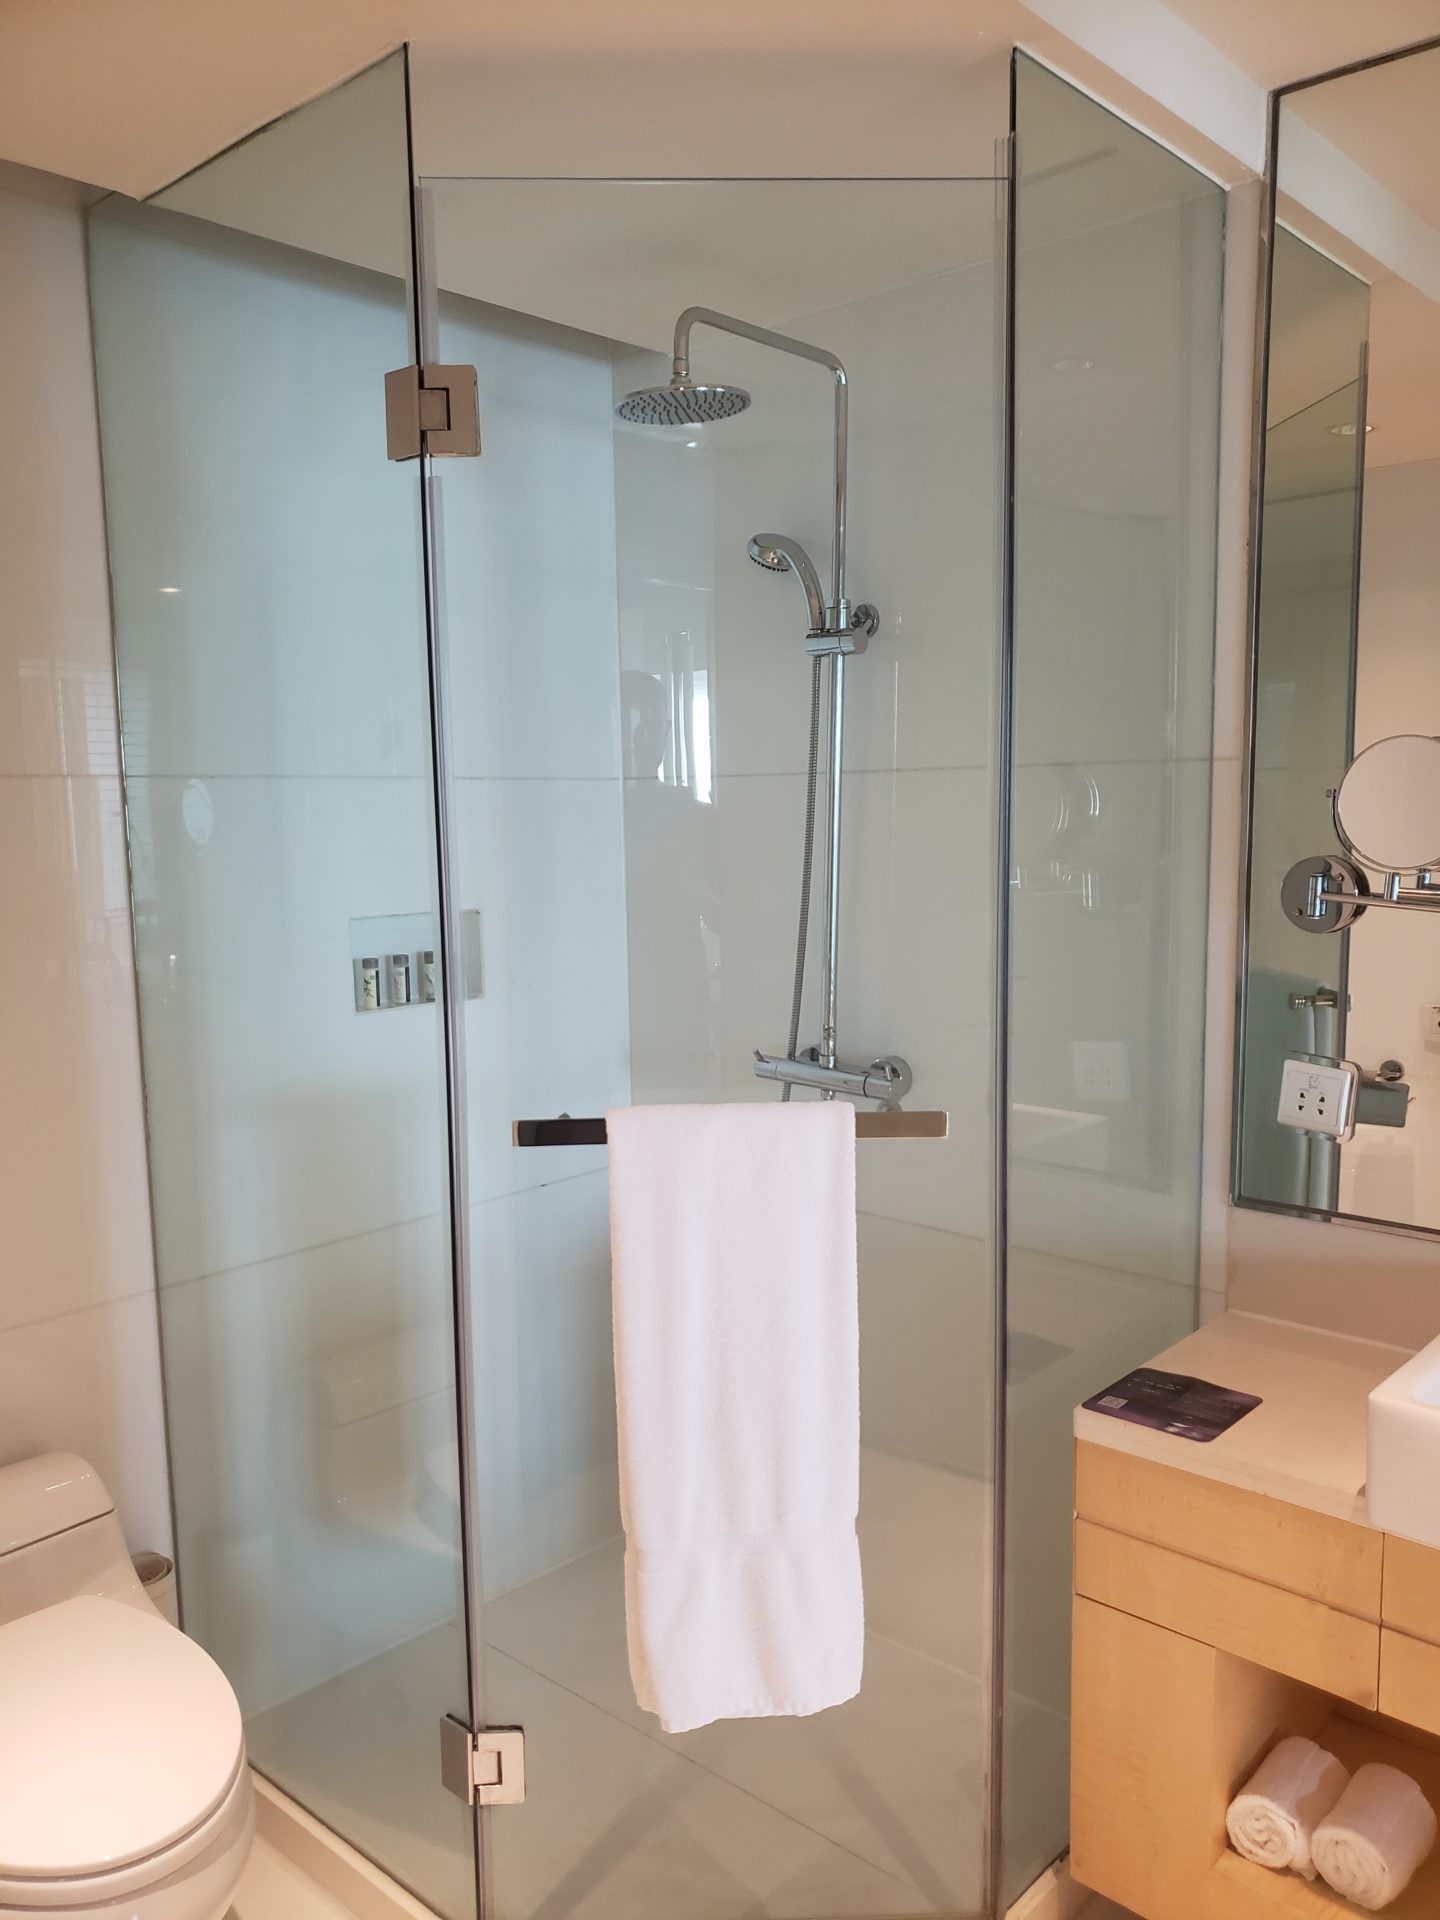 a shower with a white towel from the glass door